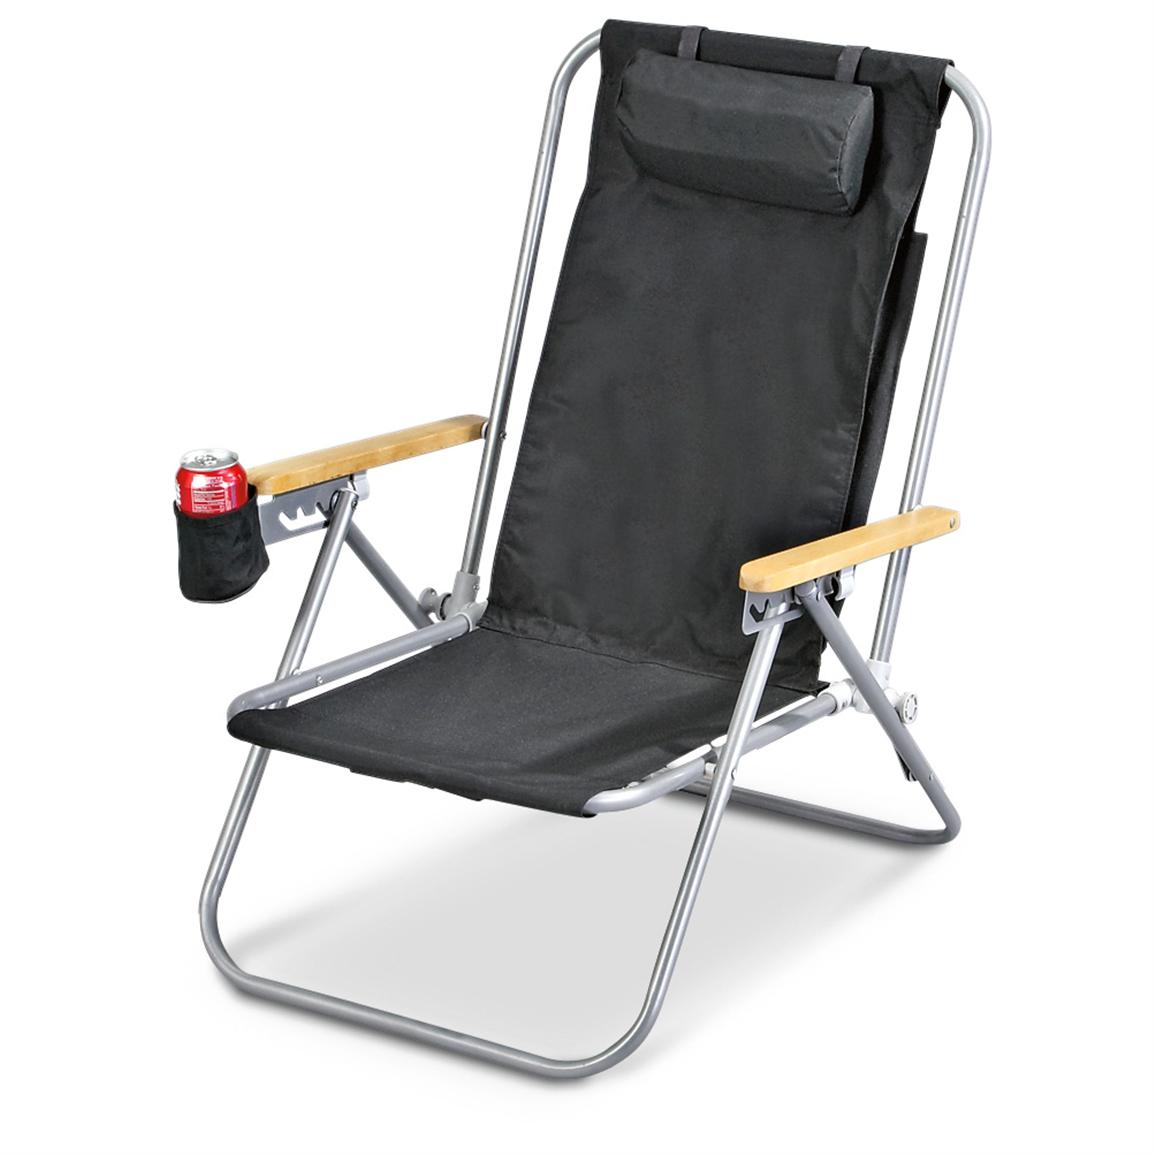 Wearever Backpack Chair 155746 Chairs At Sportsman S Guide